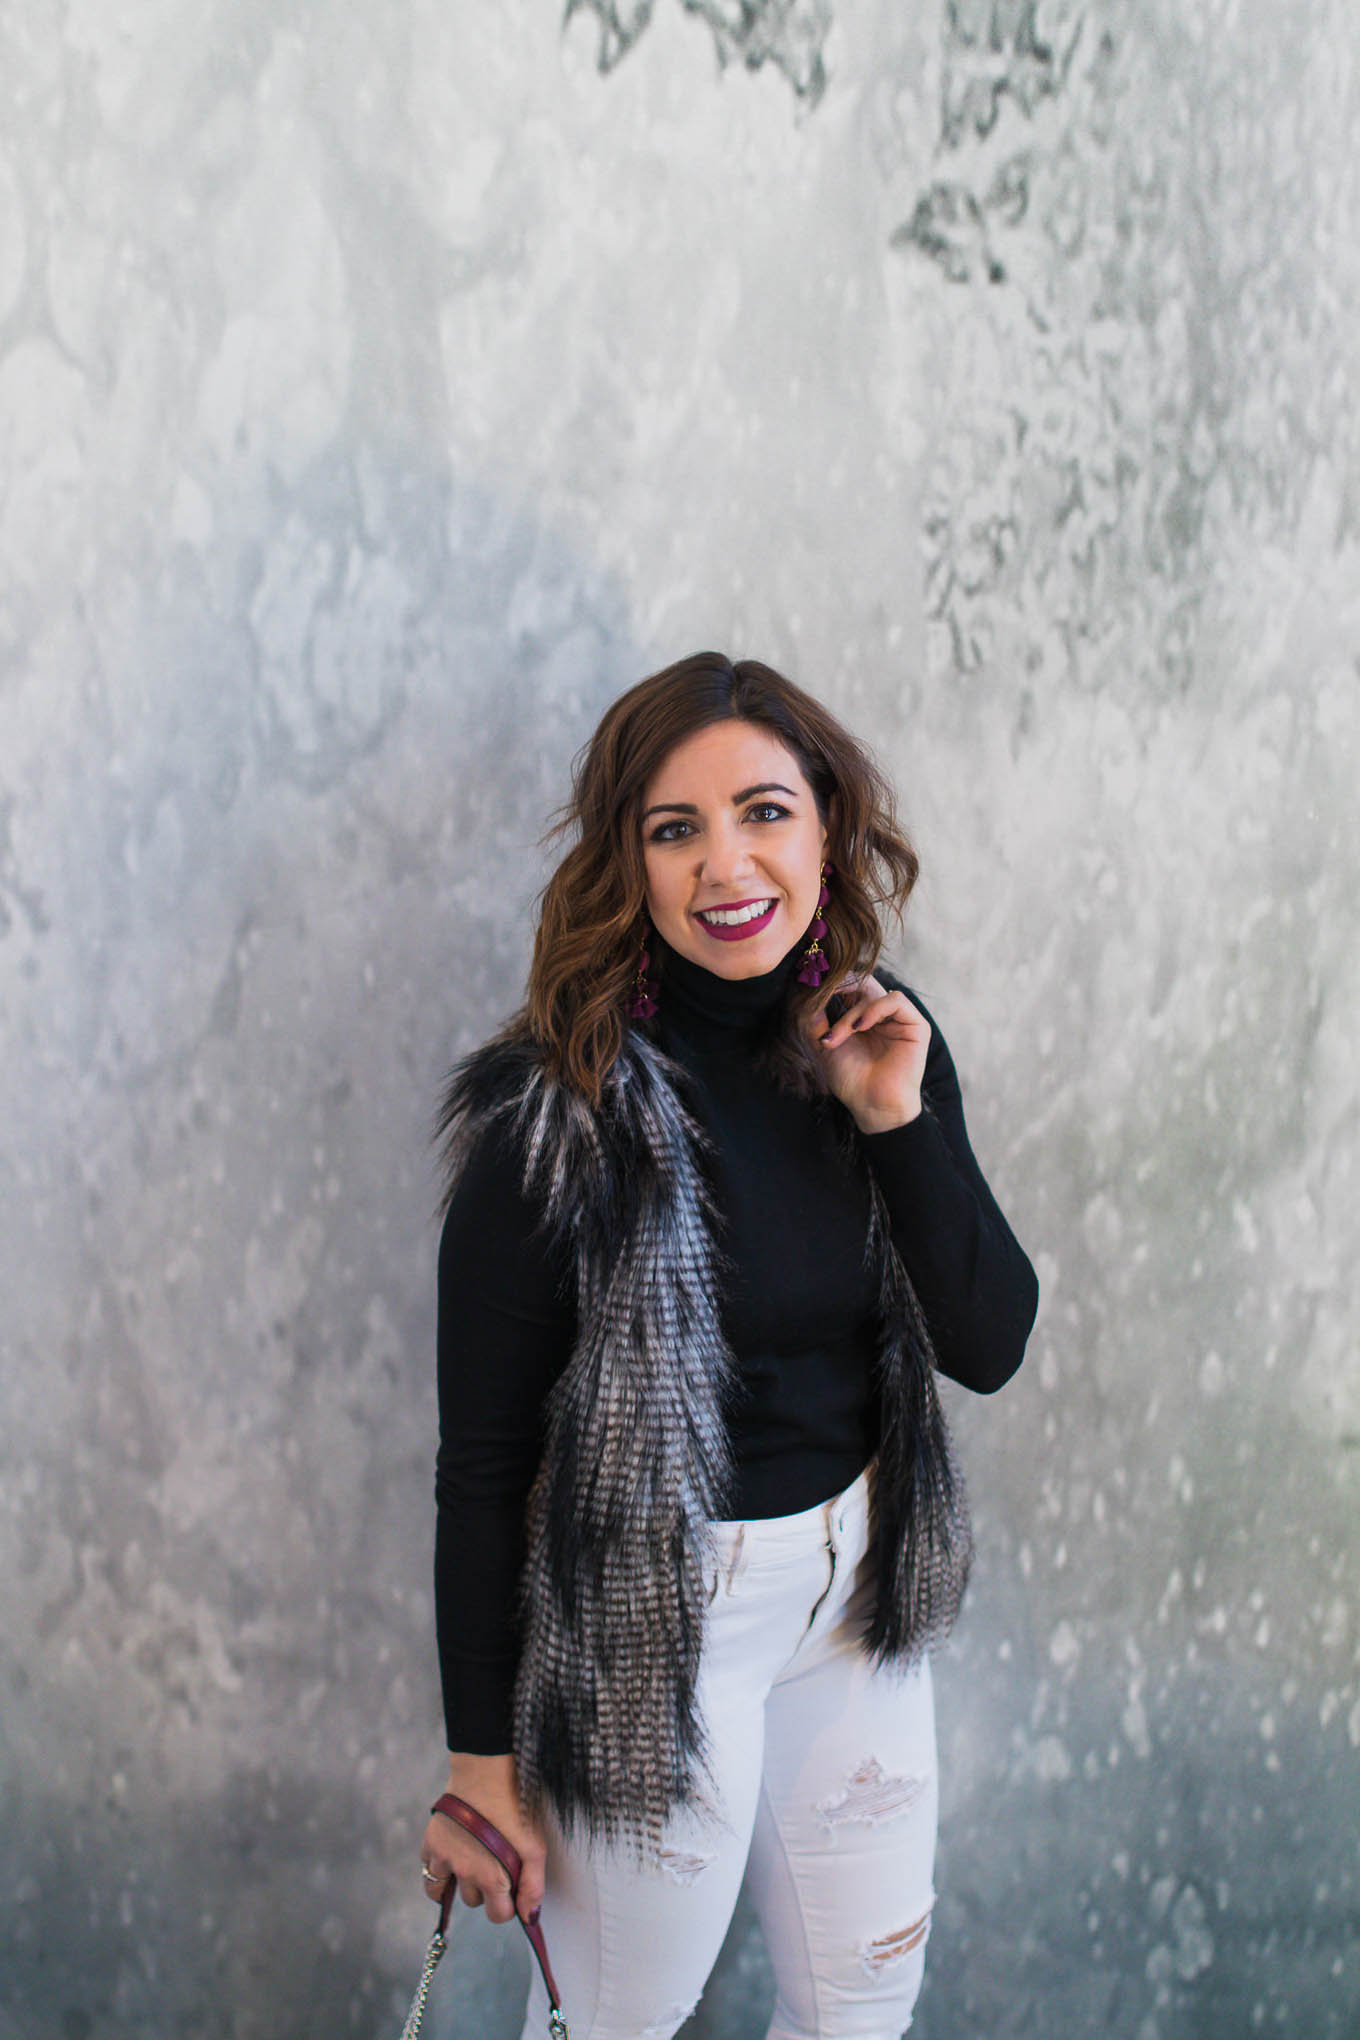 Lifestyle blogger Roxanne of Glass of Glam wearing a faux fur vest, J.Crew turtleneck, Old Navy white denim, and Baublebar earrings